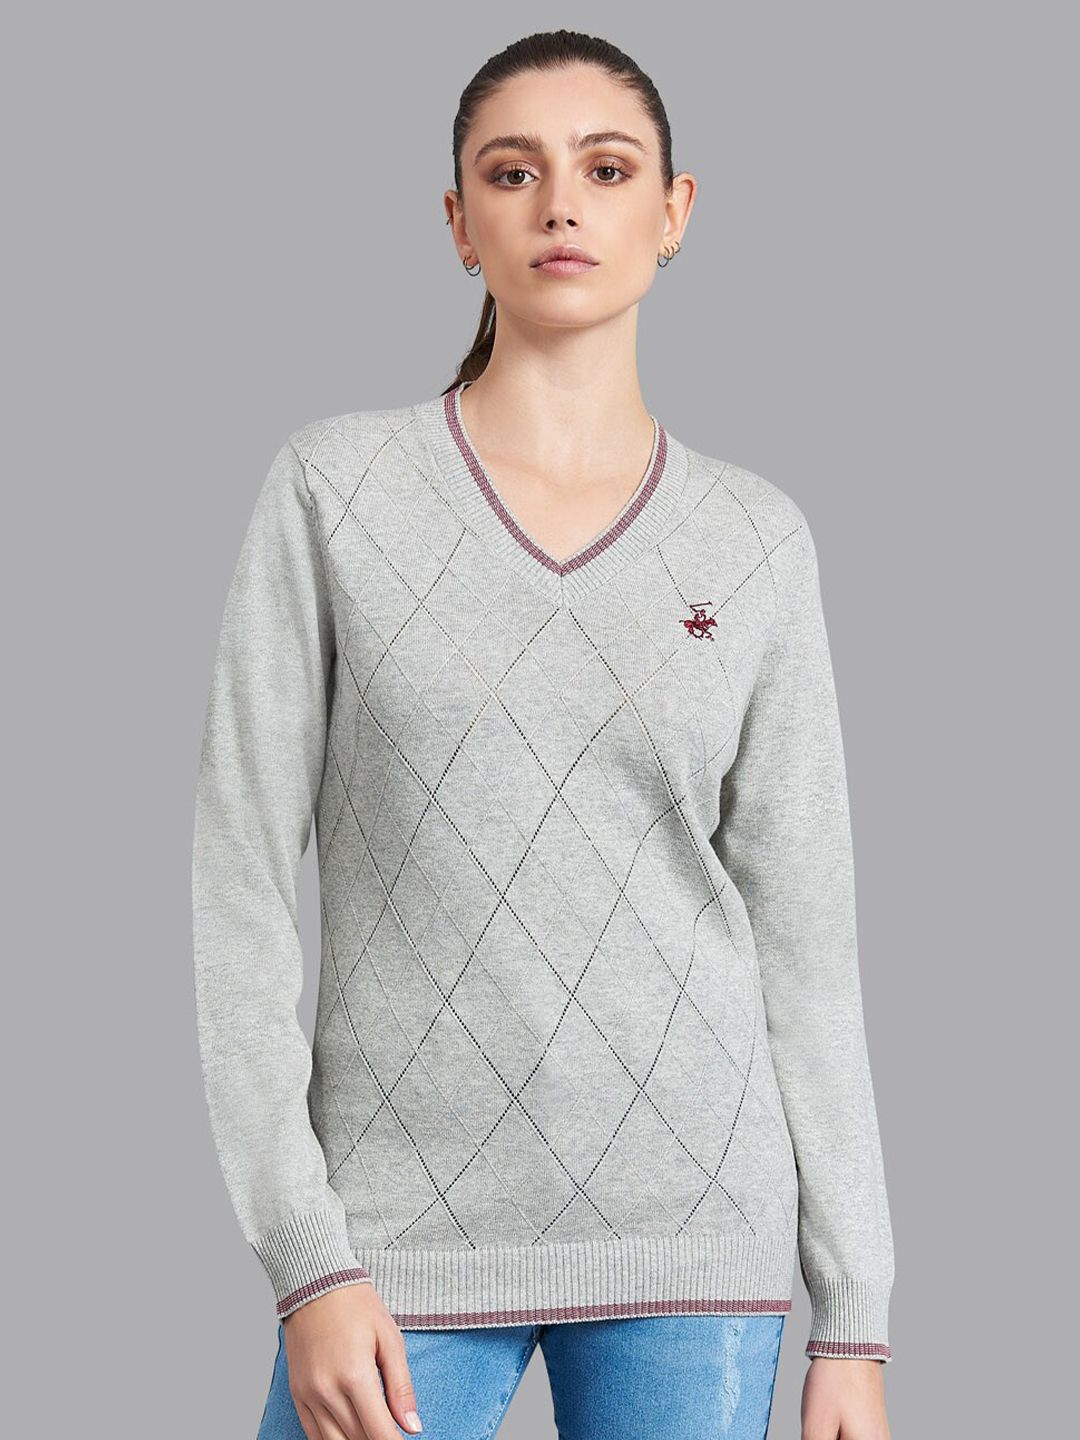 Beverly Hills Polo Club Women Grey Open Knit Pullover Price in India